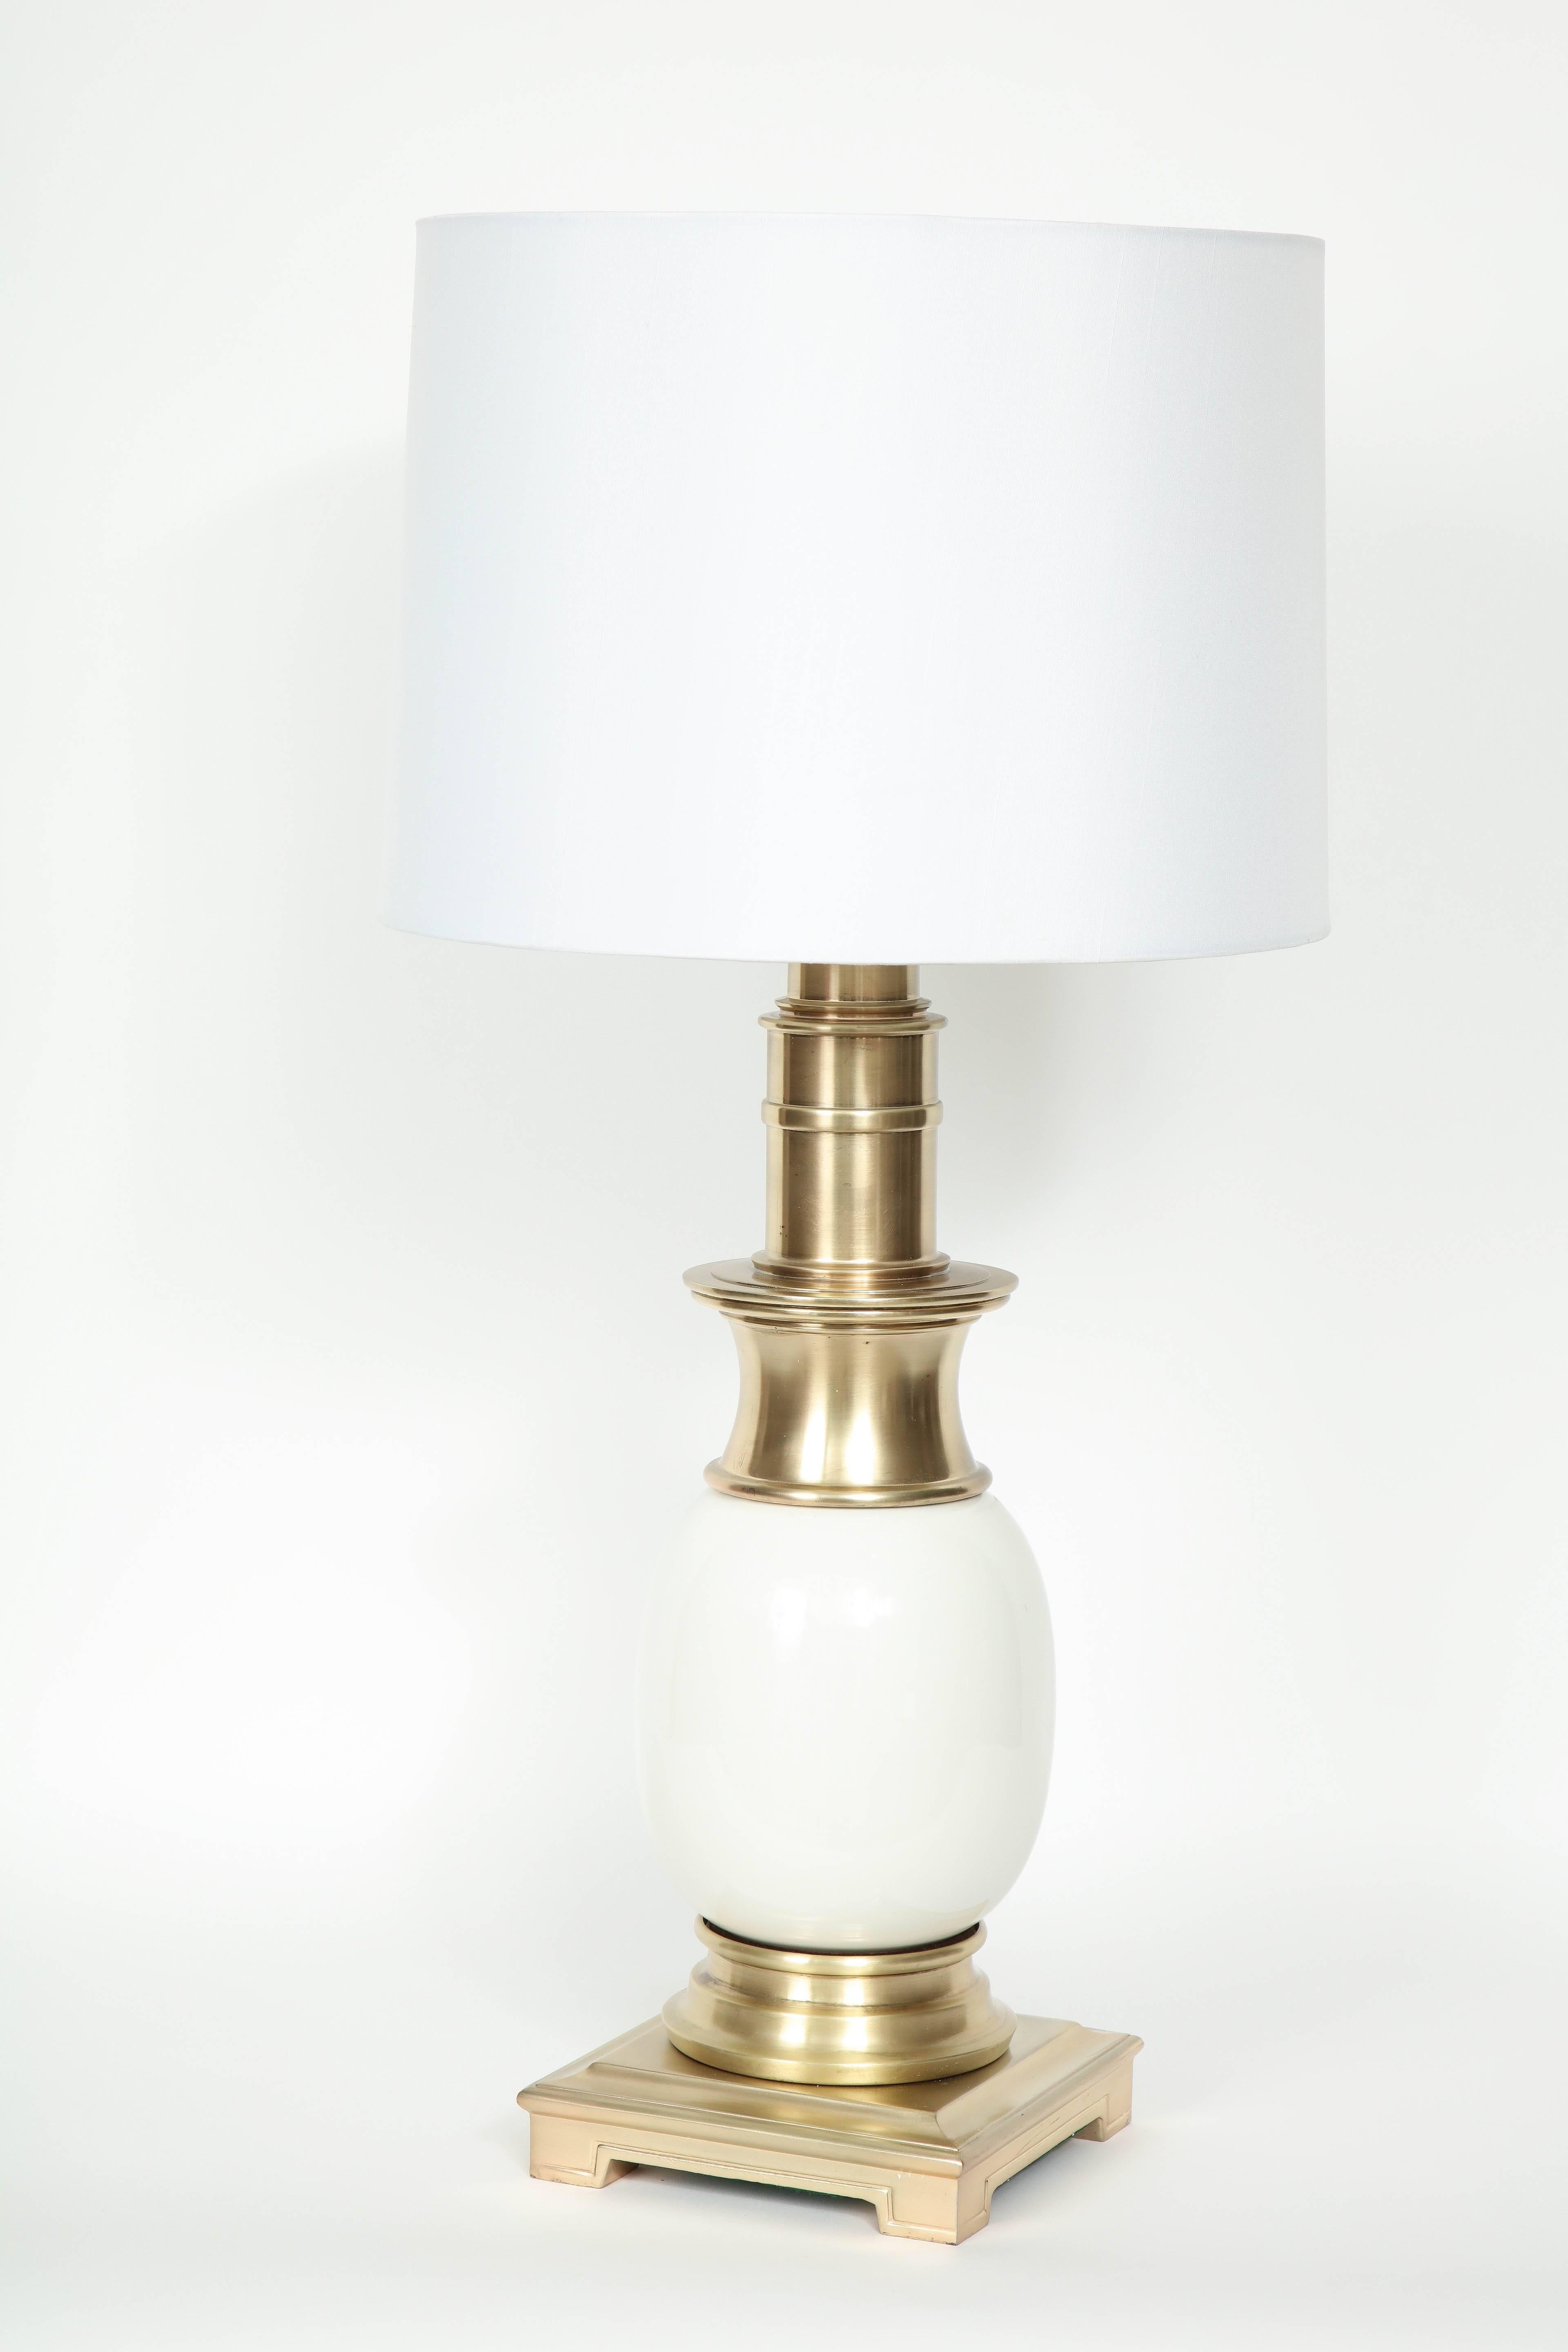 Pair of Mid-Century classically styled lamps featuring satin brass bodies with white glazed ceramic modified Ostrich egg shaped centers. Rewired with brass sockets and new cords. 100W max, shades not included.